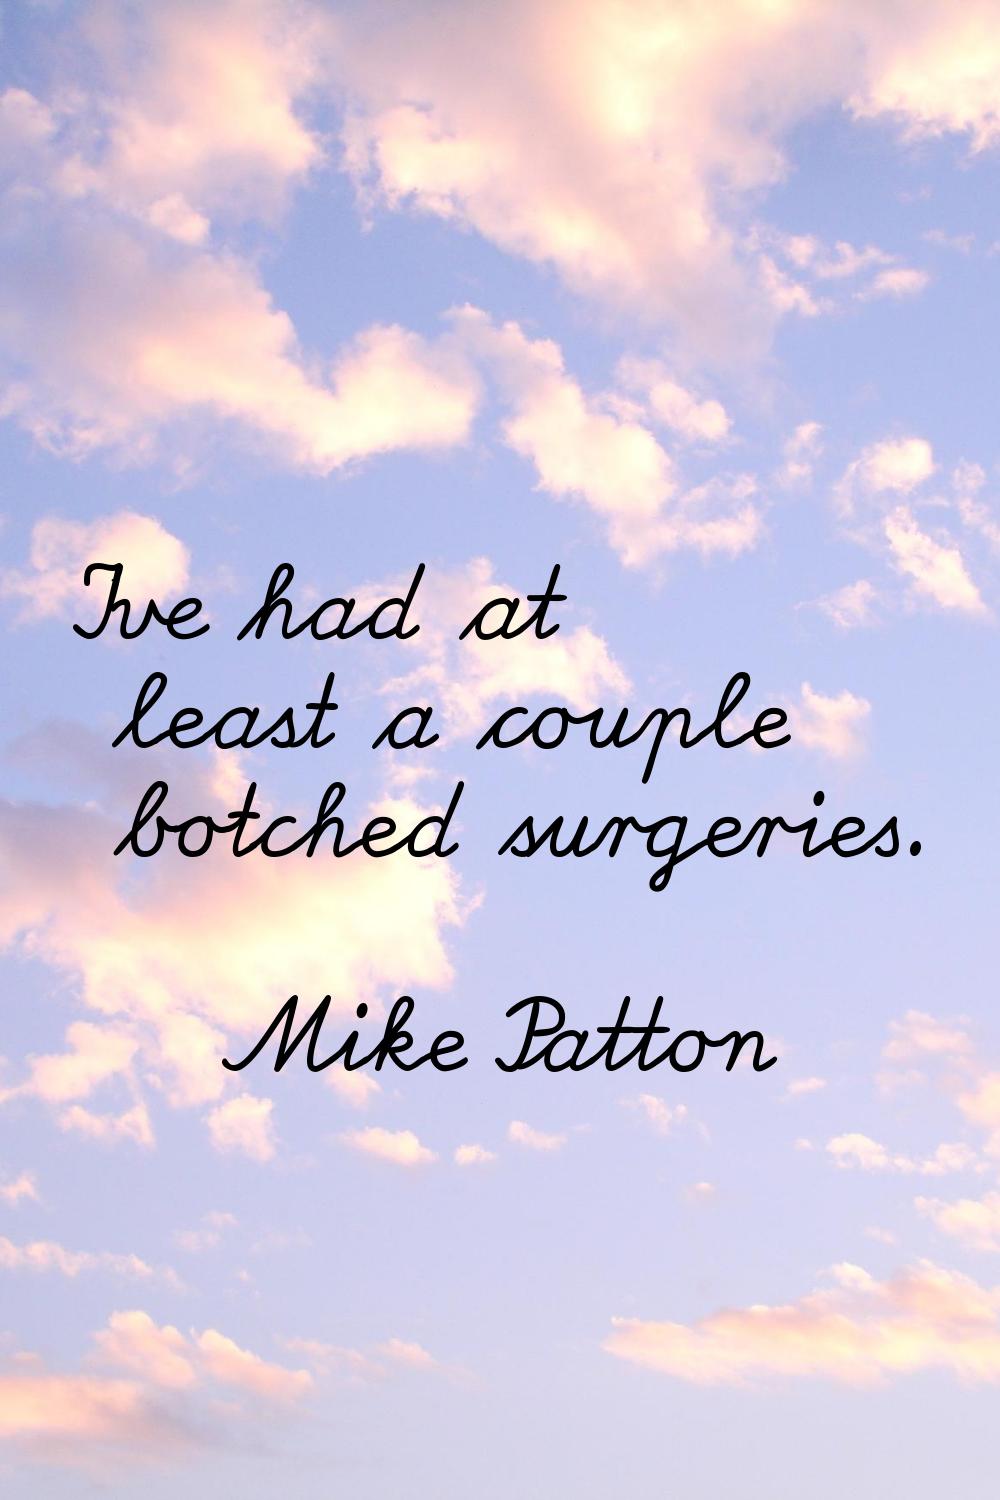 I've had at least a couple botched surgeries.